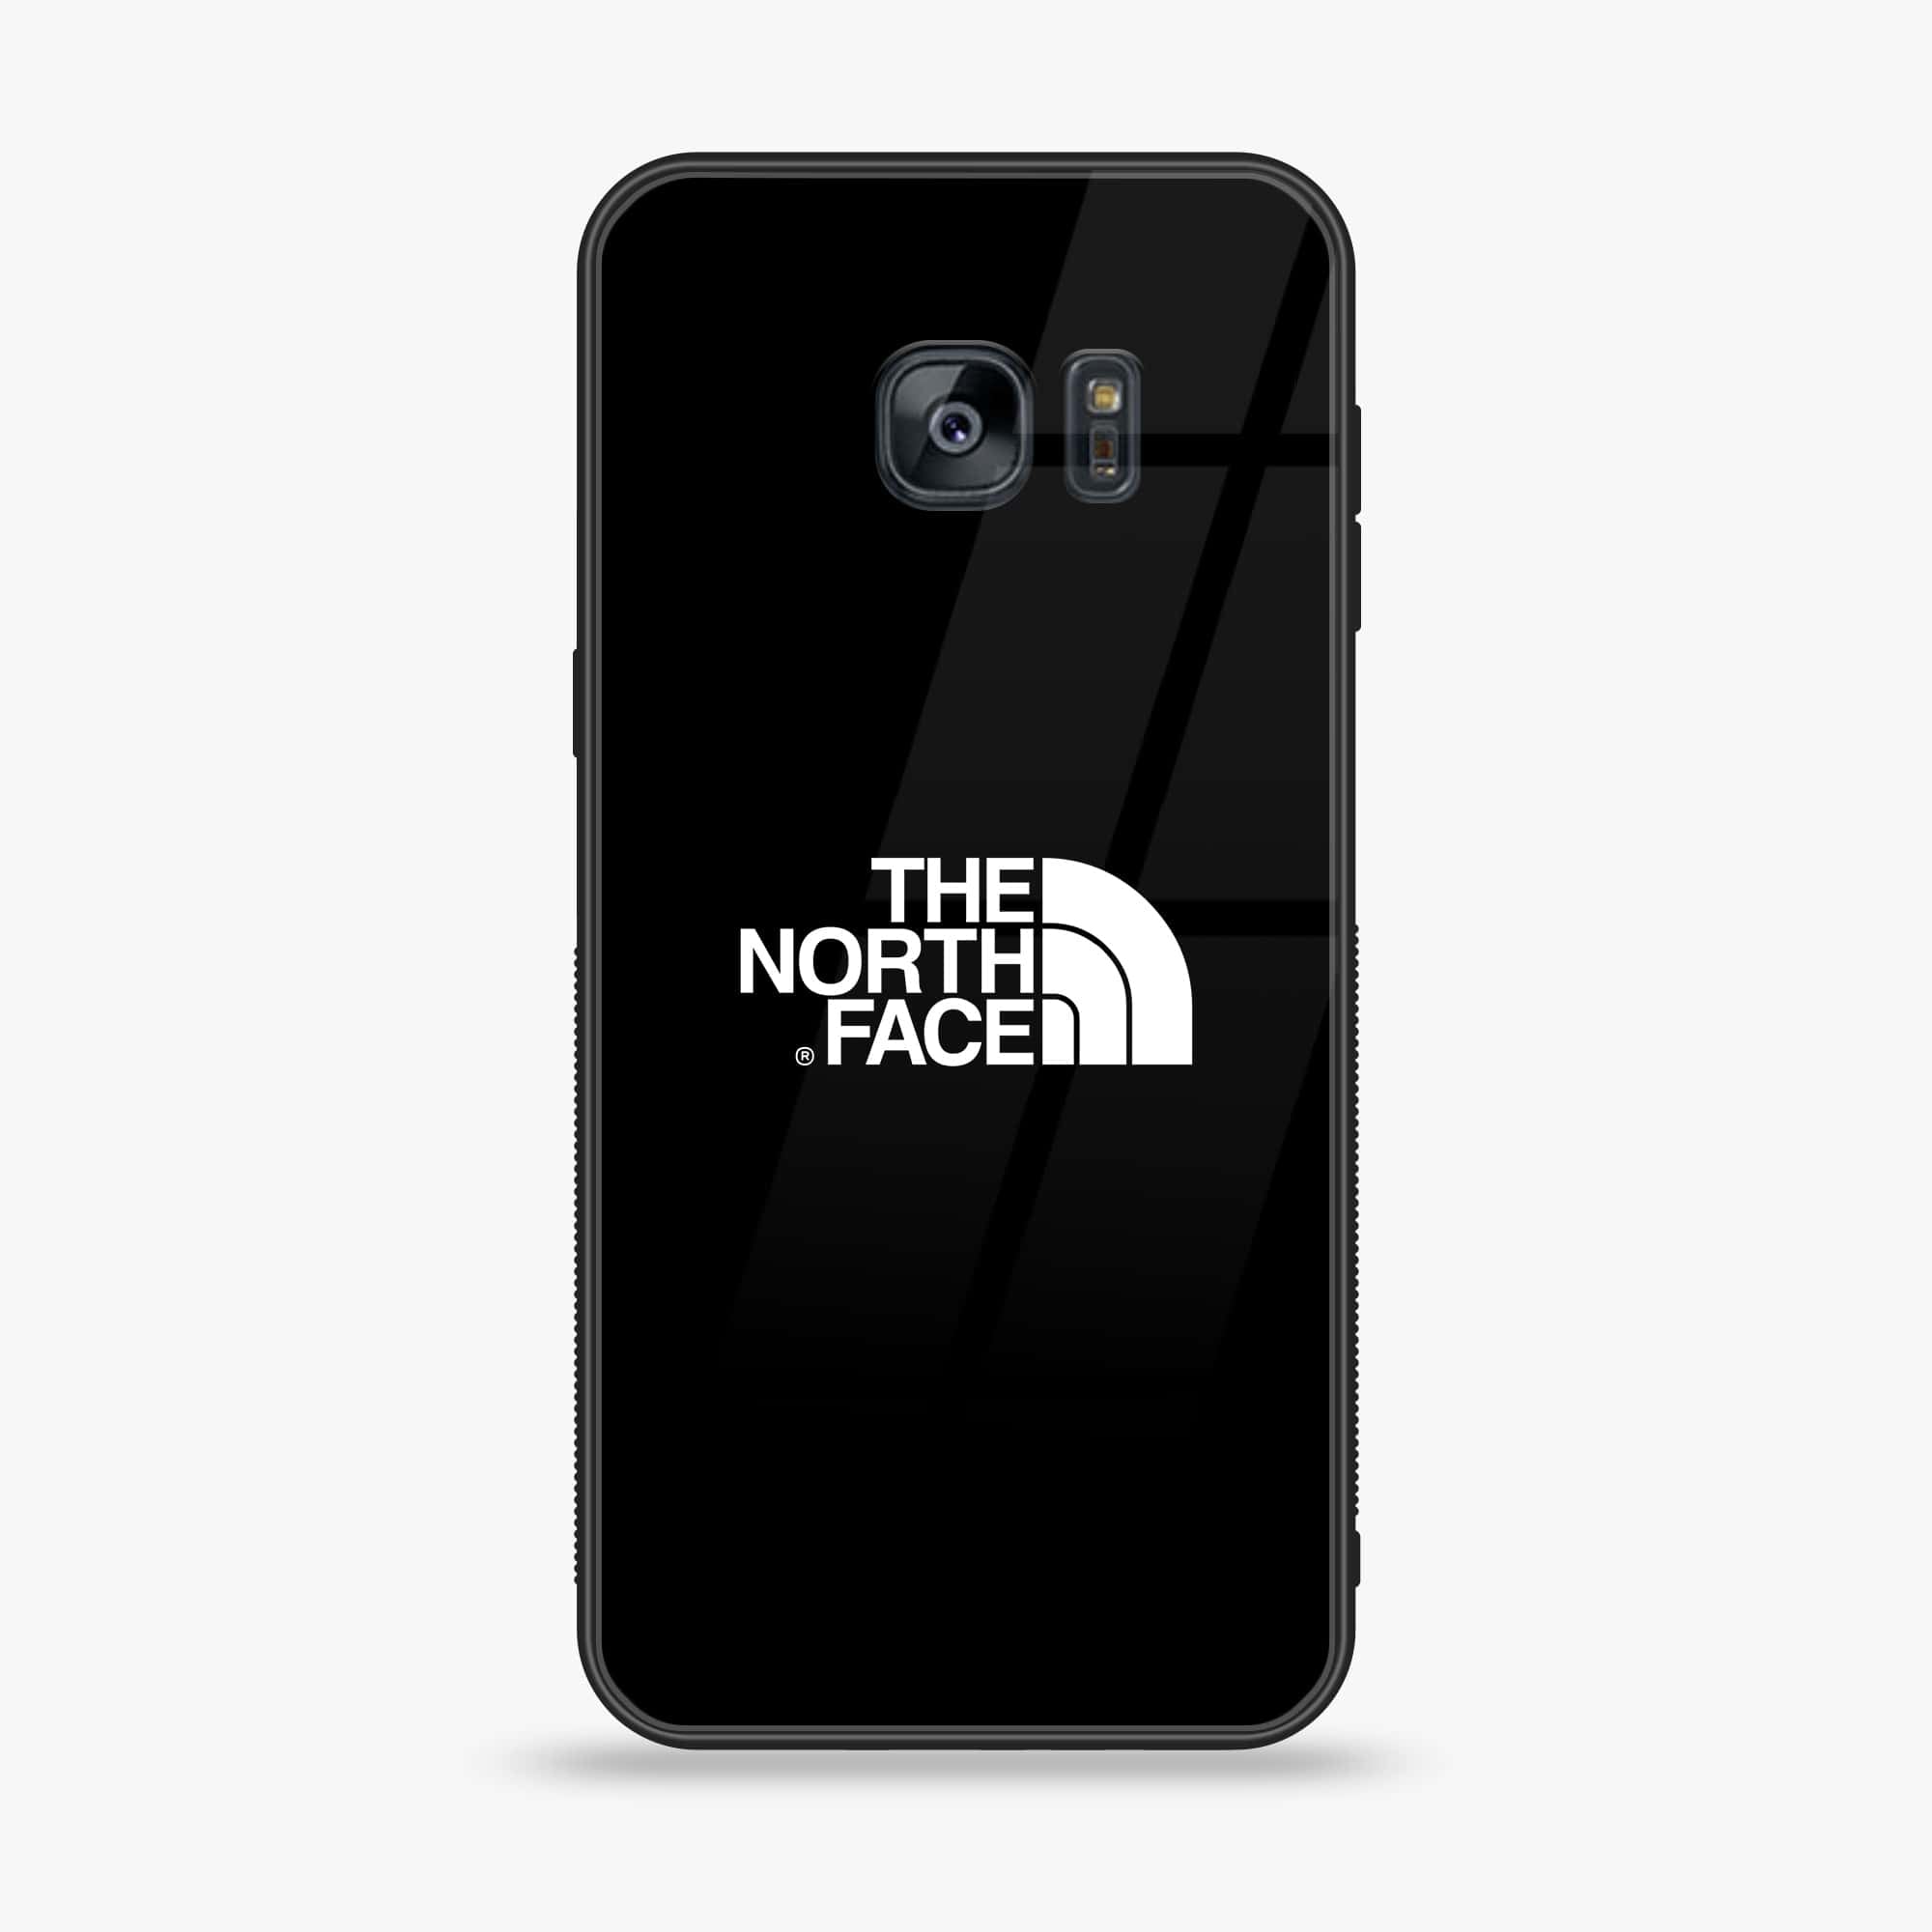 Samsung Galaxy S7 - The North Face Series - Premium Printed Glass soft Bumper shock Proof Case